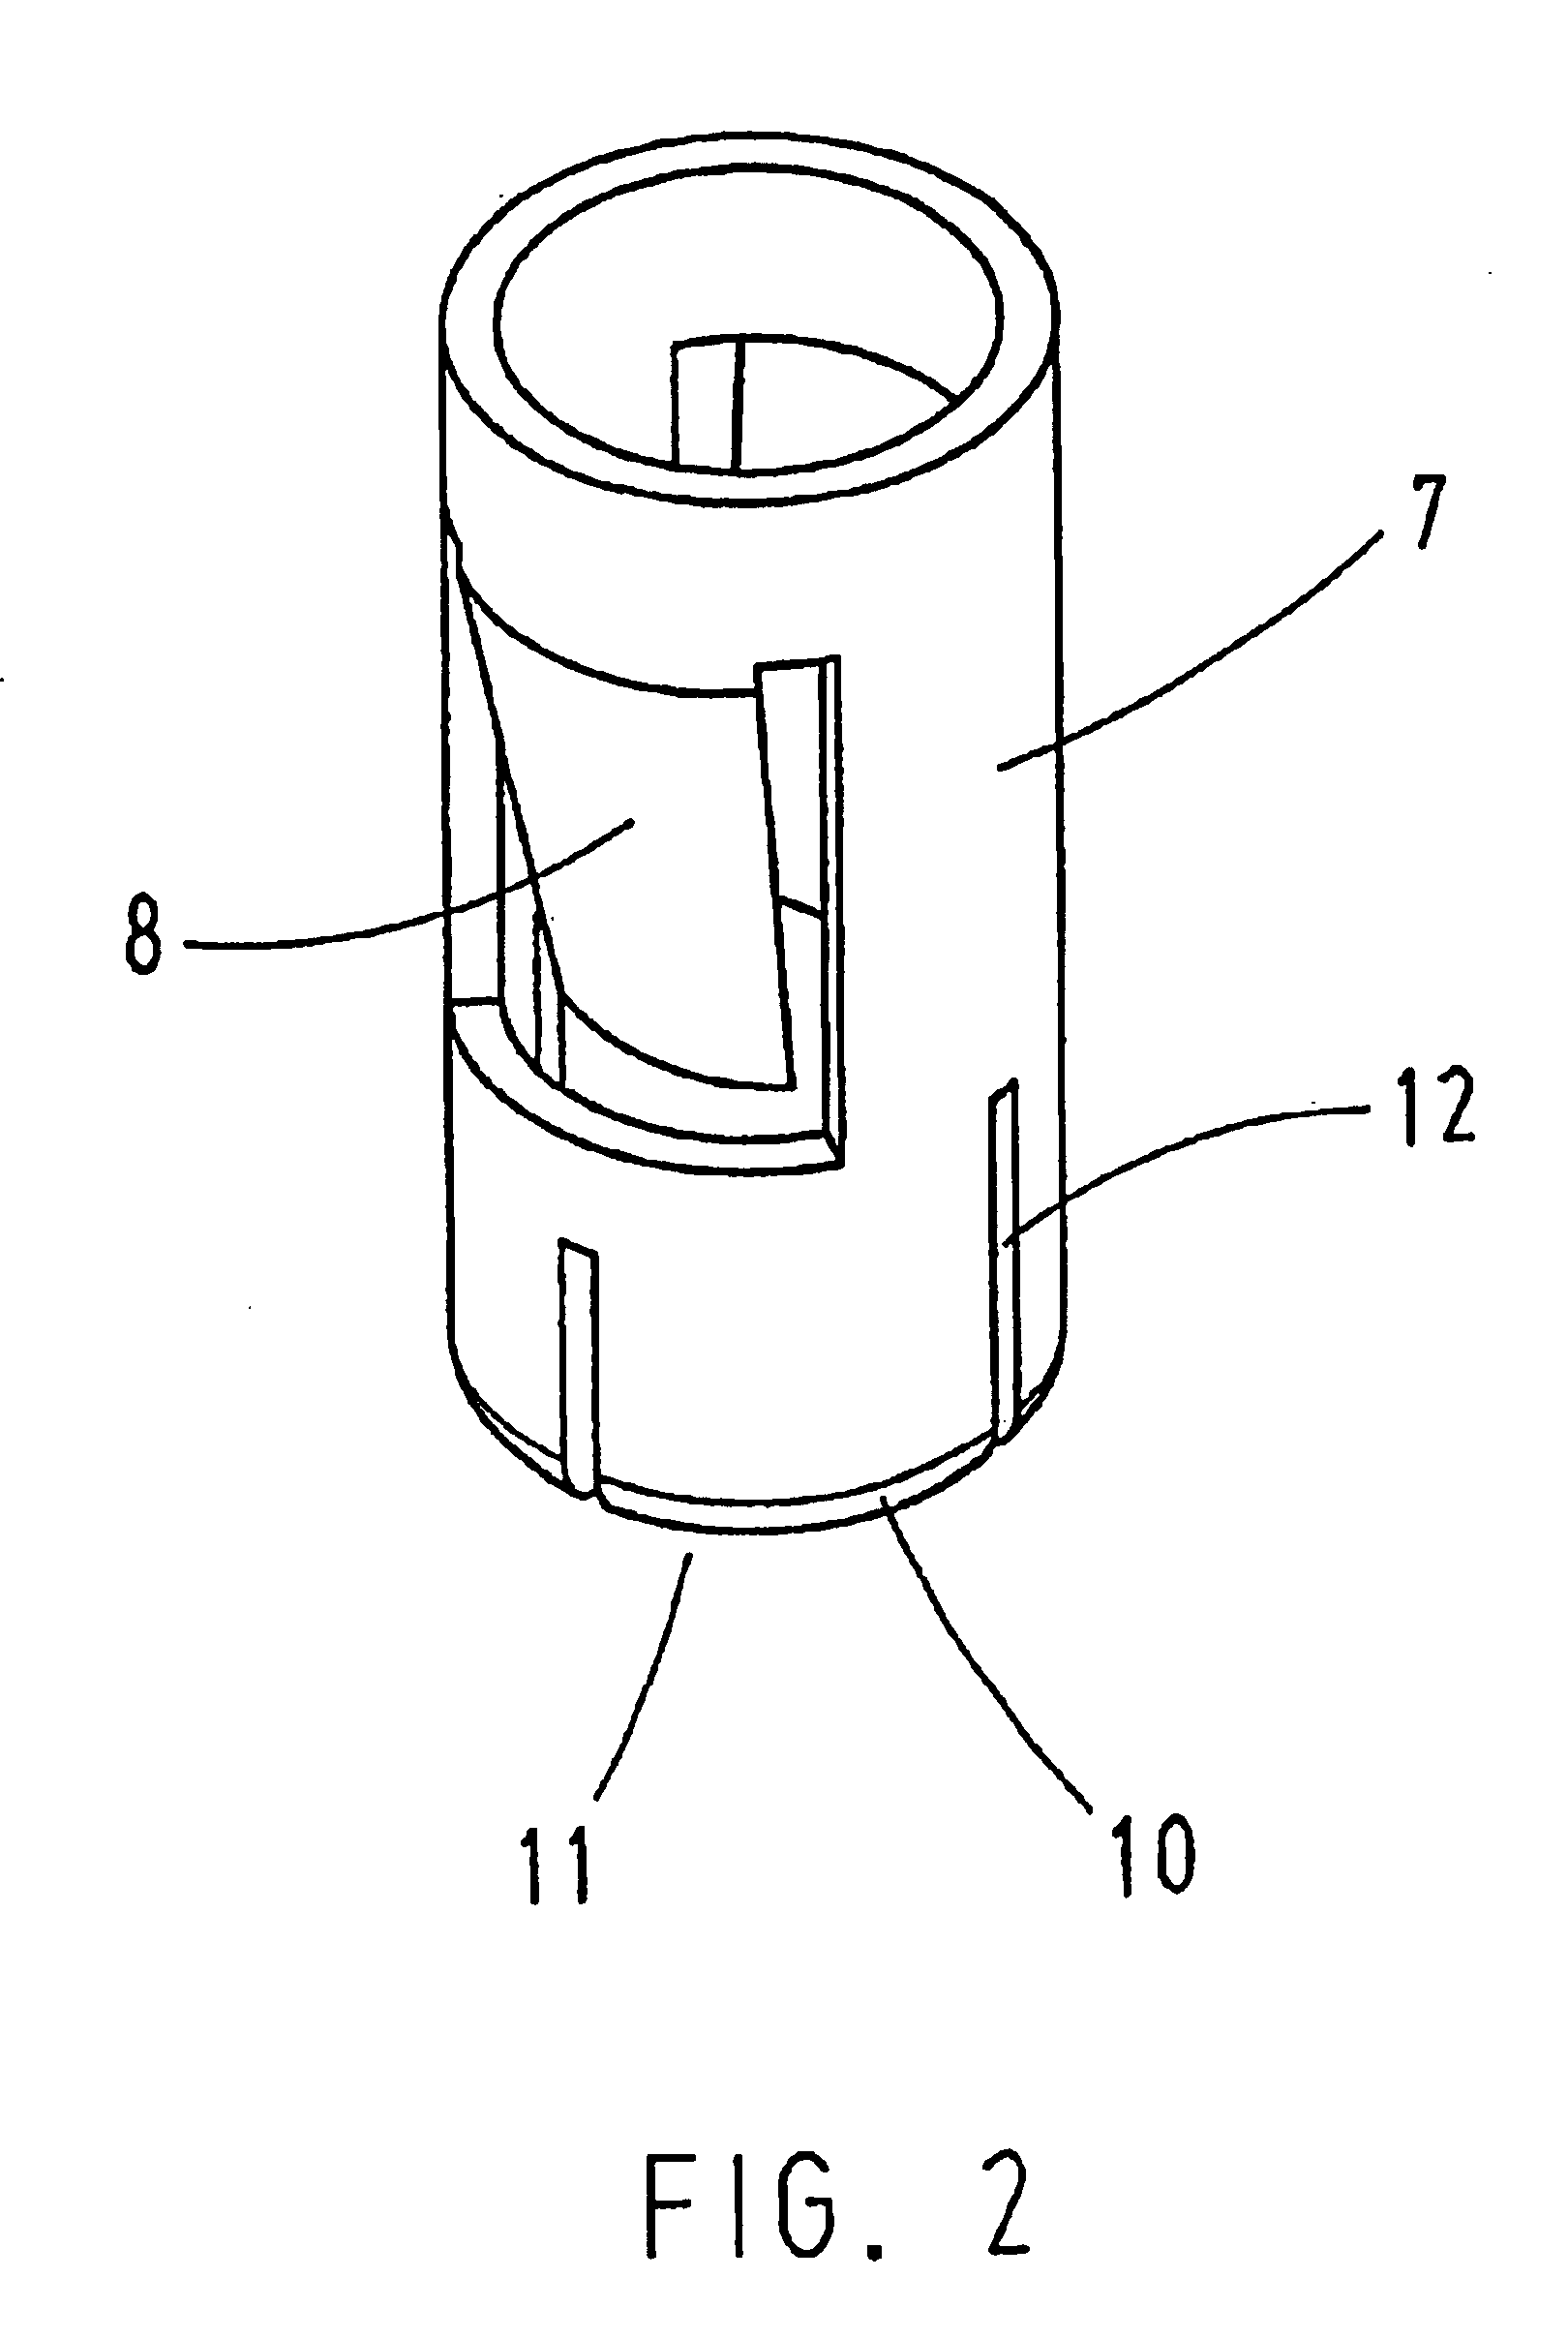 Electrical contact element, in particular a contact element formed as pin contact or socket contact